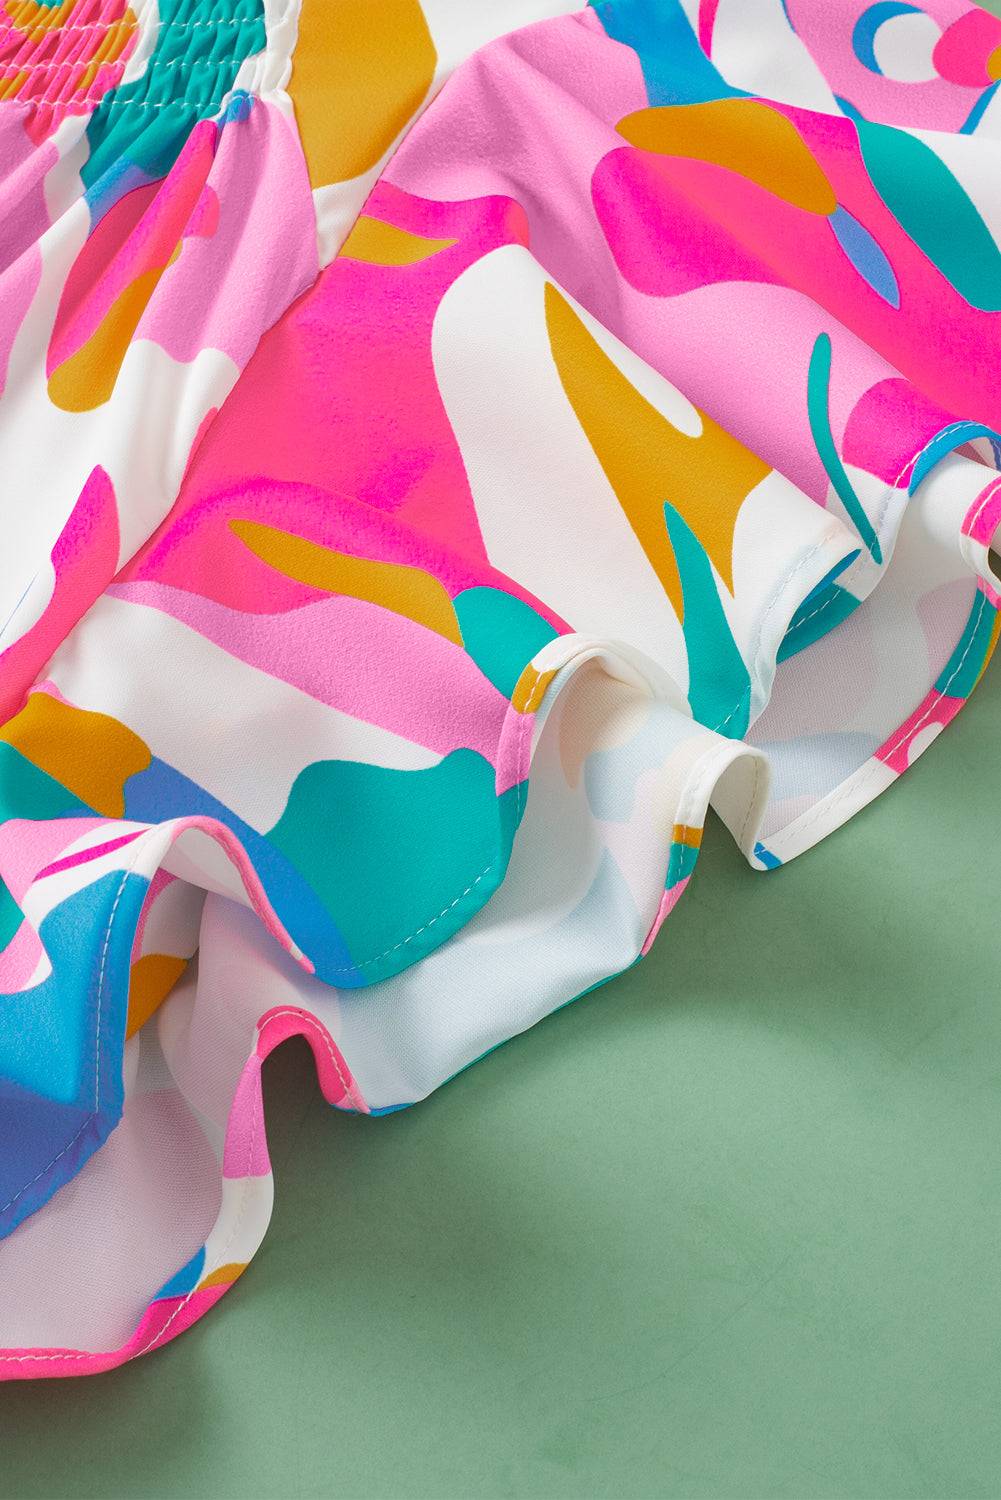 a close up of a pink, blue, yellow and green dress